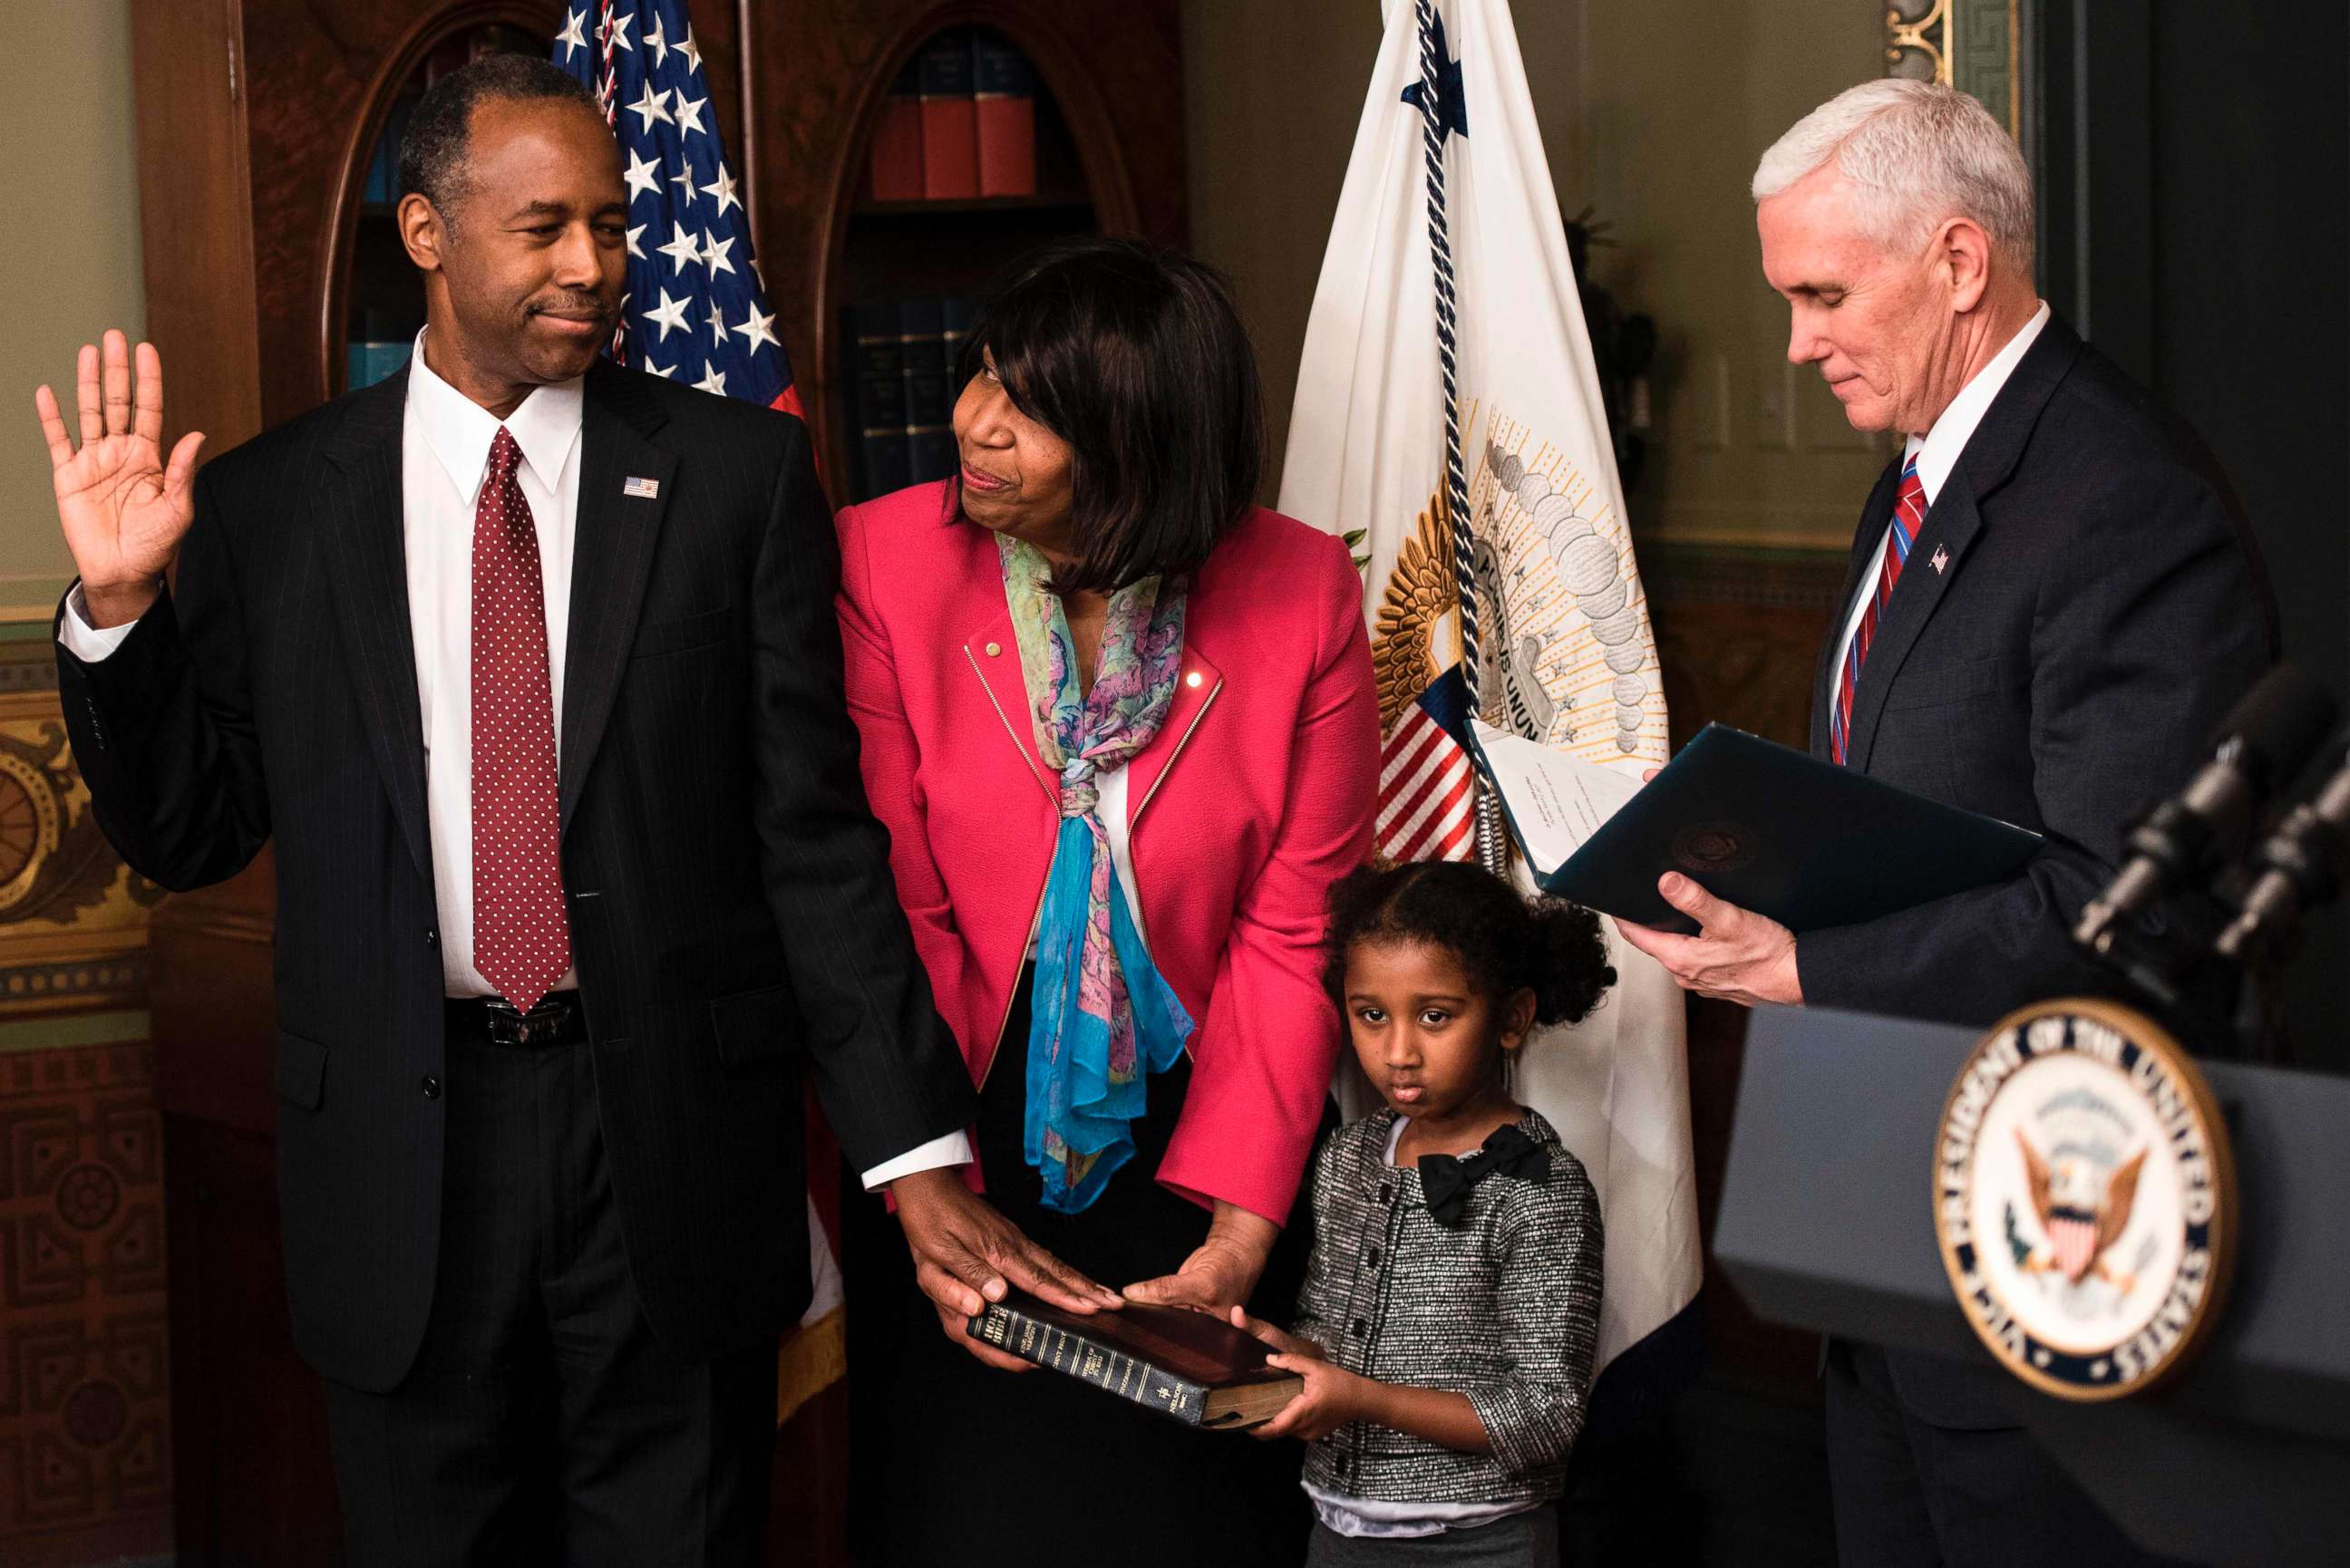 PHOTO: Ben Carson is sworn in as U.S. Secretary of Housing and Urban Development by Vice President Mike Pence (R) as his wife Candy Carson and granddaughter Tesora Carson watch during a ceremony, March 2, 2017. in Washington, D.C. 